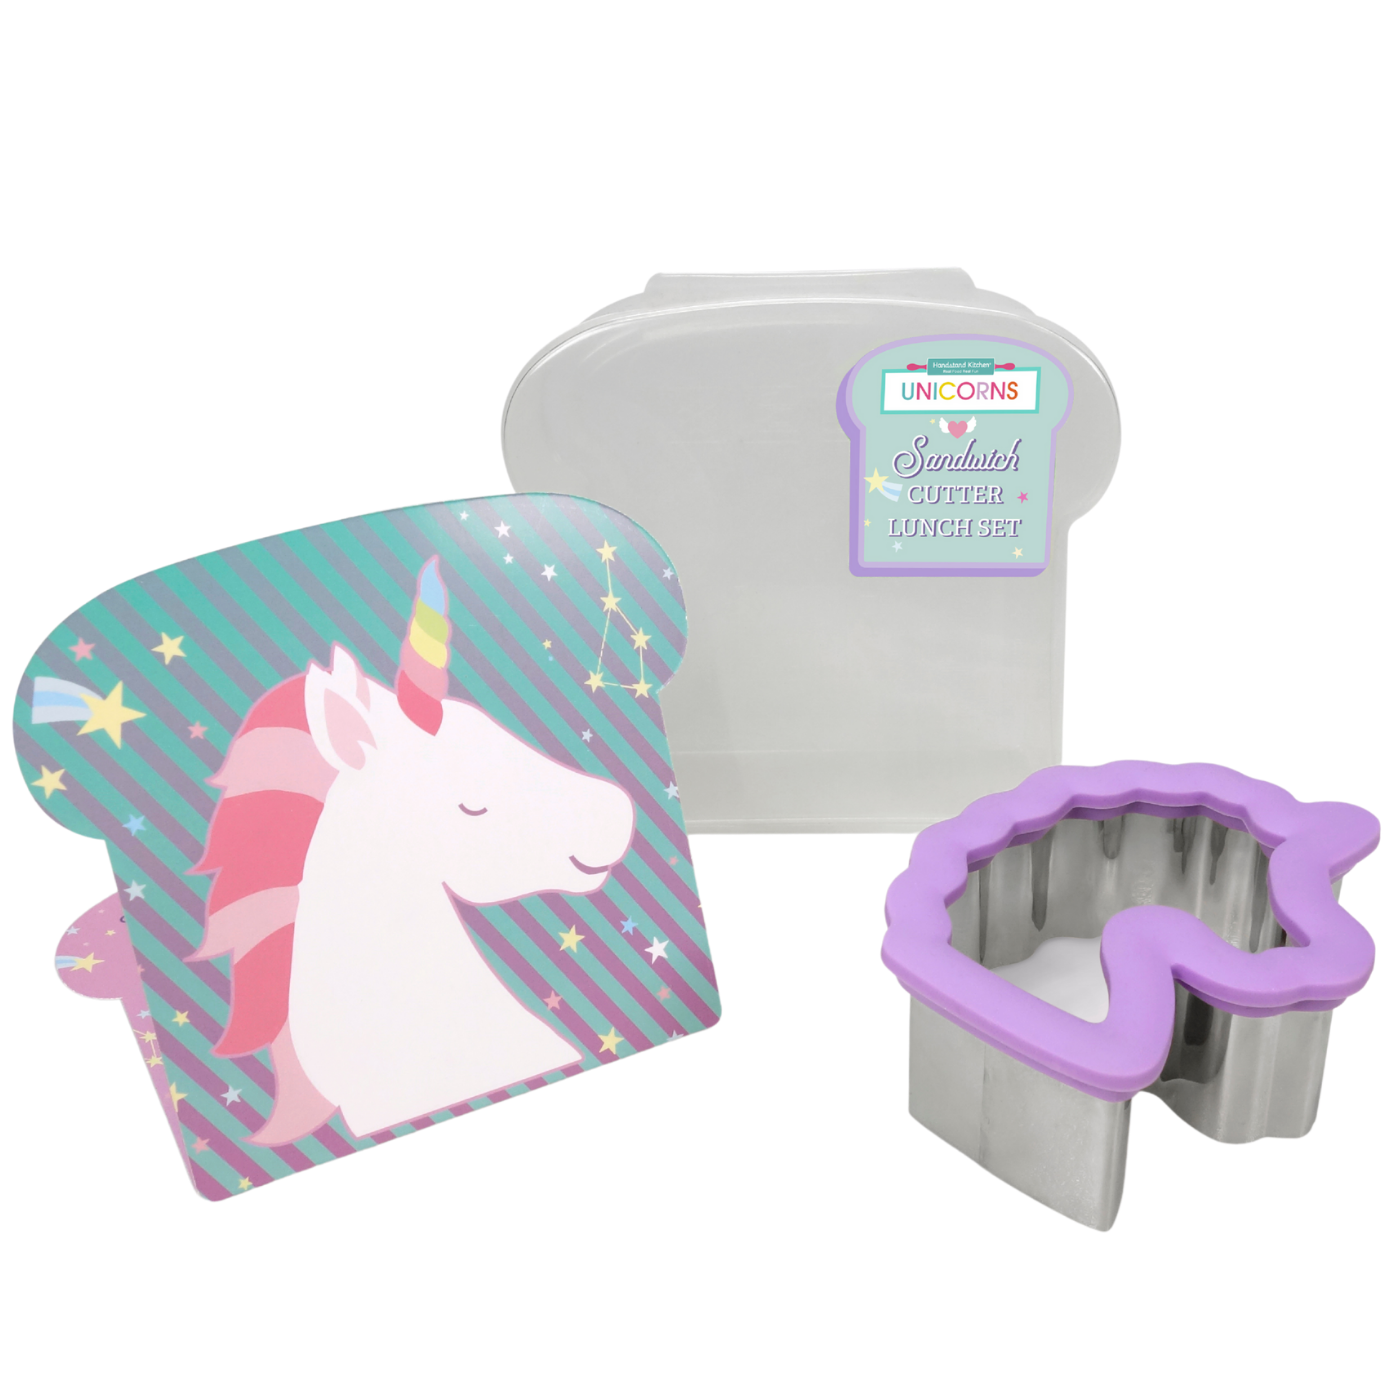 Out of box image of Rainbows &amp; Unicorns Sandwich Cutter Lunch Set. 1 unicorn stainless steel sandwich cutter, 1 sandwich box and recipes.